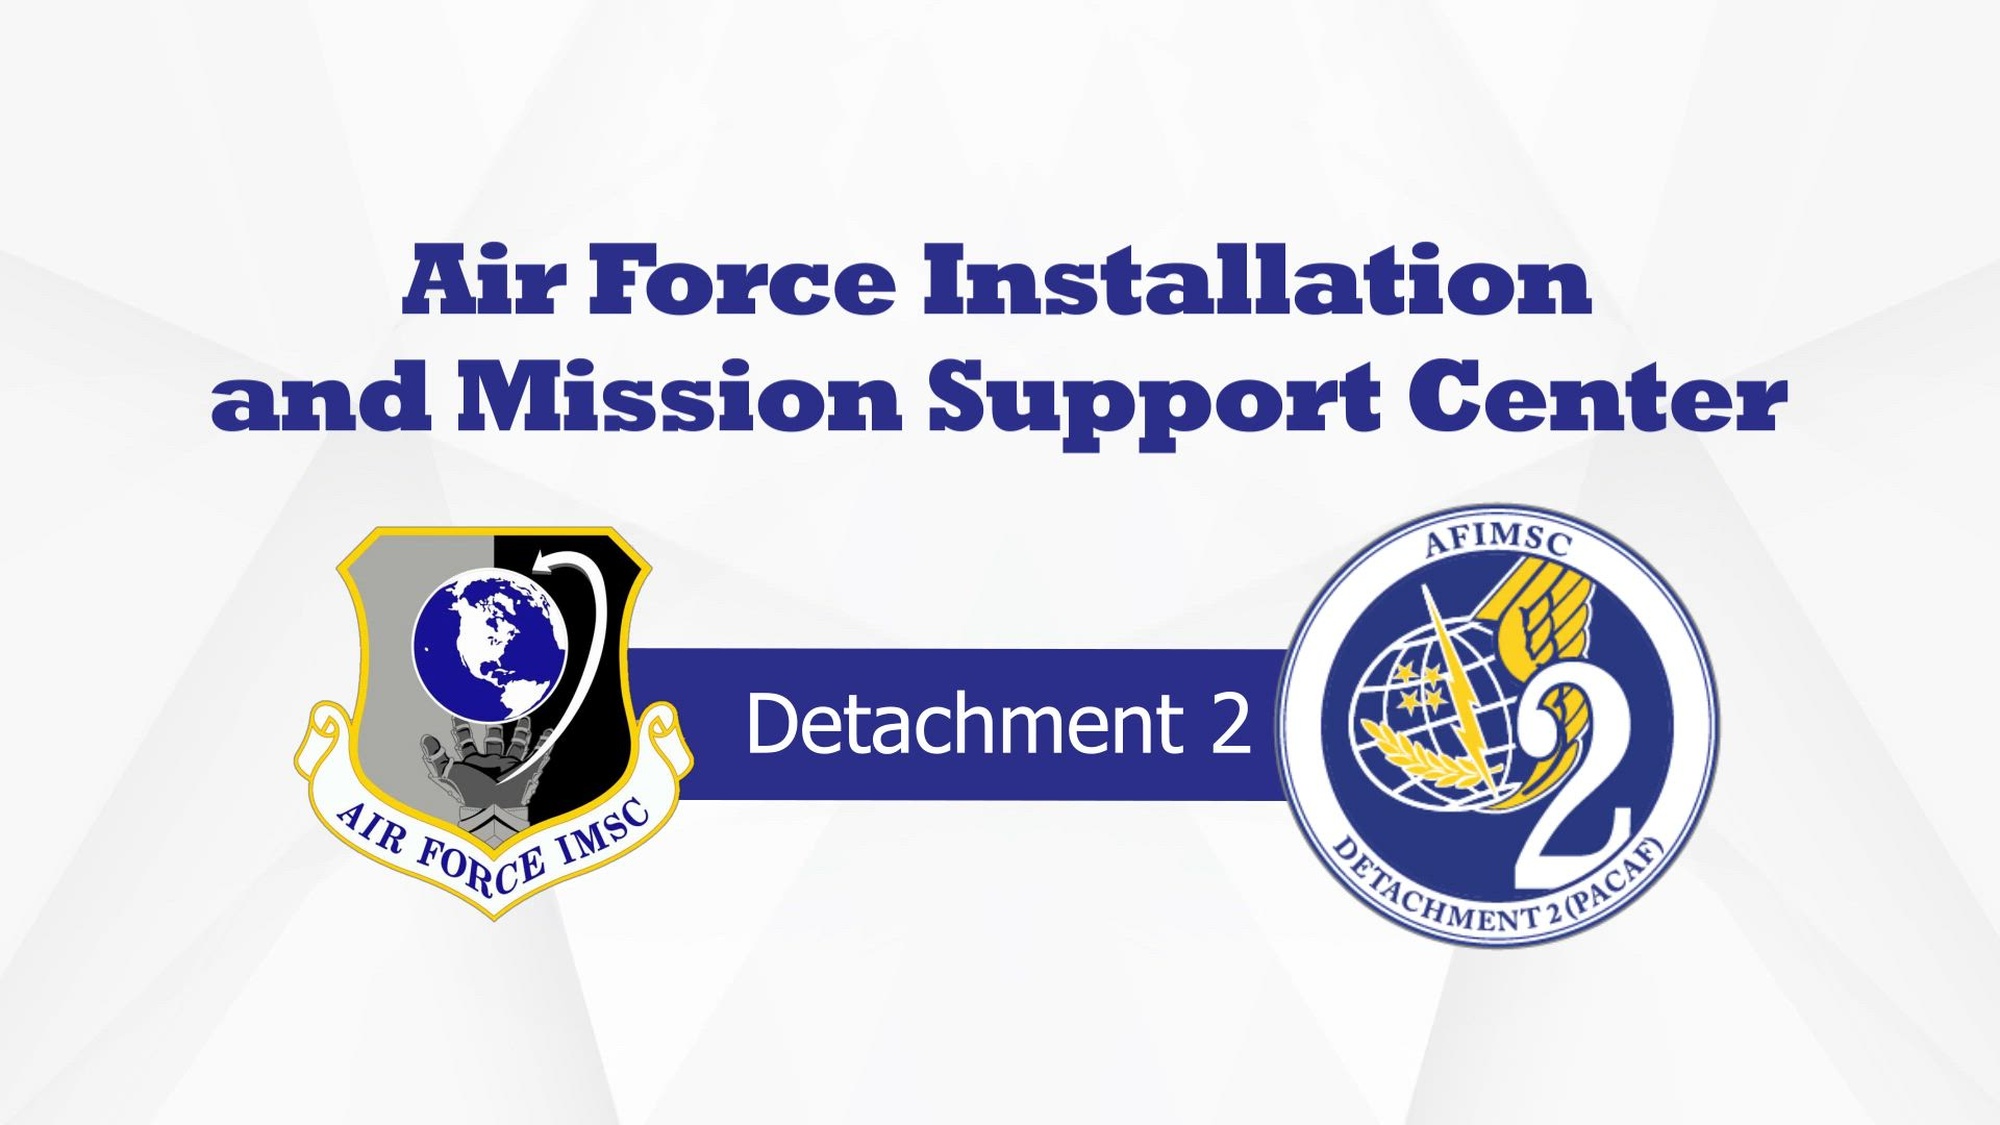 Air Force Installation and Mission Support Center Detachment 2 provides daily installation and mission support services to Pacific Air Forces Command and is critical to Air and Space Force success in the Pacific, enabling the lethality, readiness, and care for Airmen, guardians, and their families.